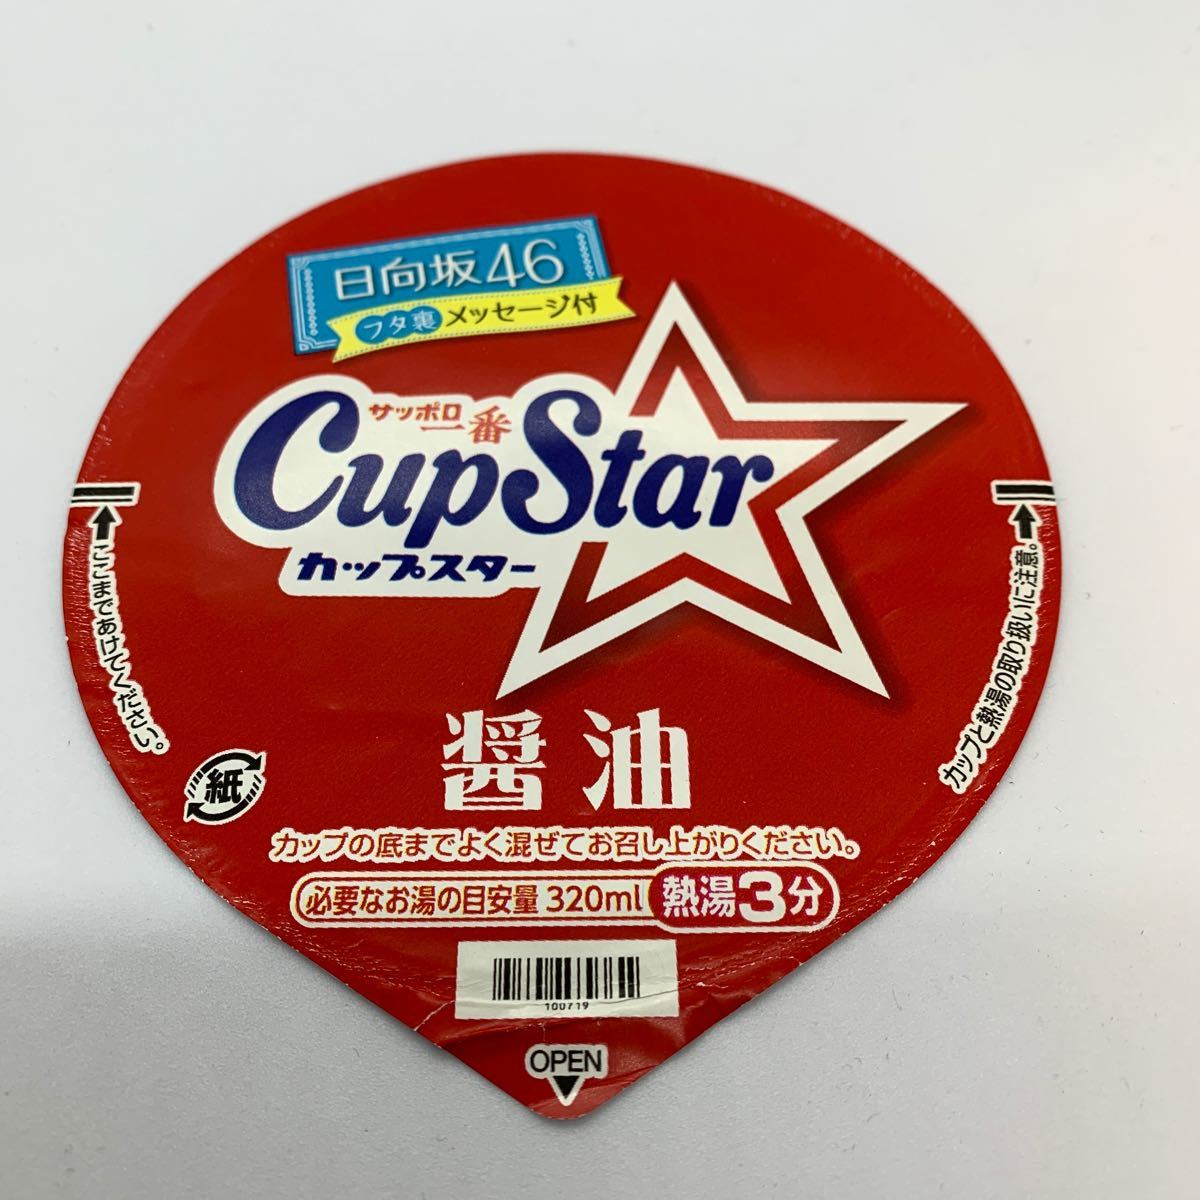  cup Star * Hyuga city slope 46* Kato history . autograph & message 1 sheets limitation package cup noodle cover 